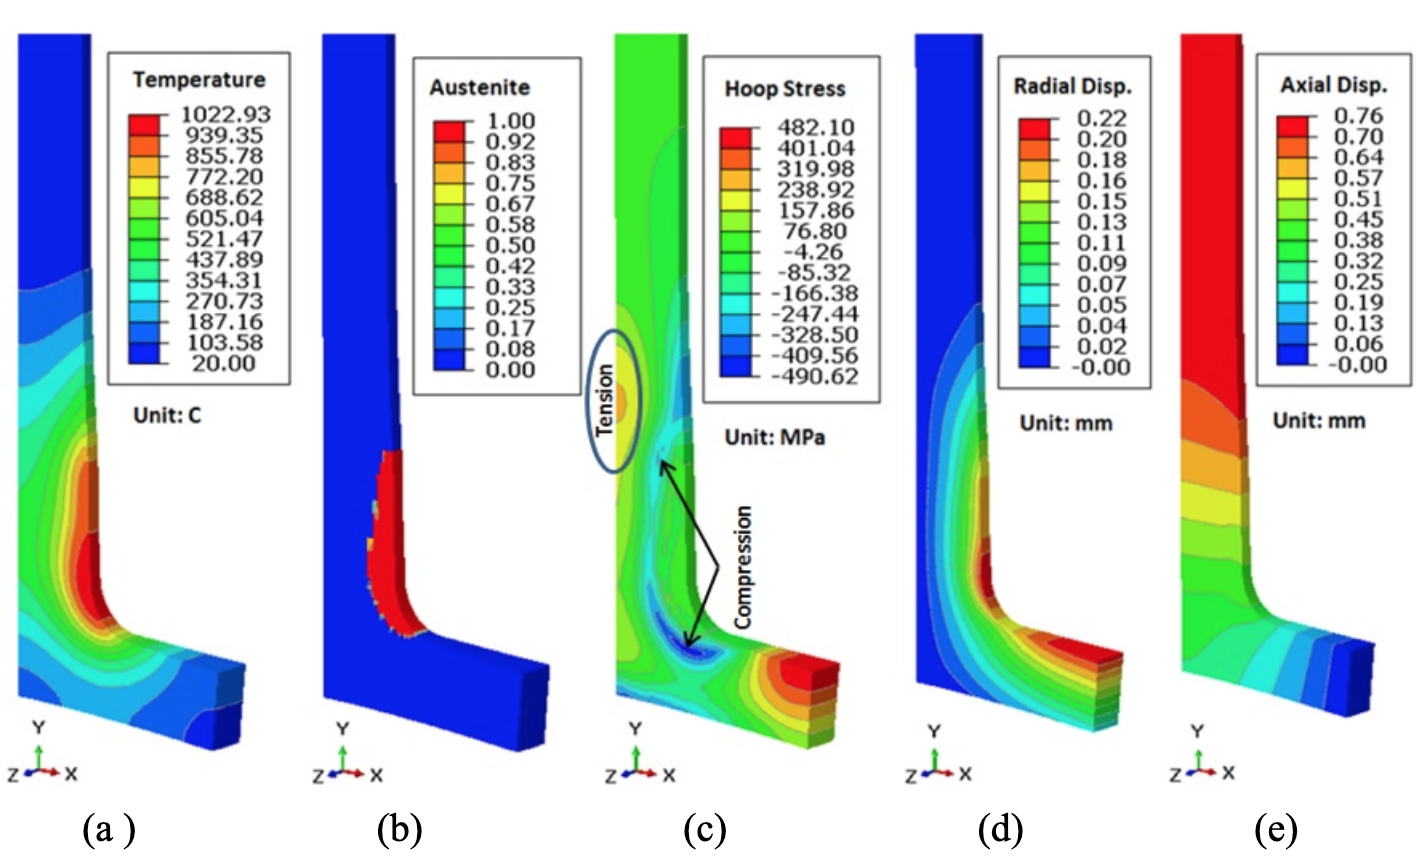 Fluxtrol - Modeling Stress and Distortion of Full-Float Truck Axle During Induction Hardening Process - Figure 4 (a) Temperature, (b) austenite phase, (c) hoop stress, (d) radial displacement, and (e) axial displacement distributions at the end of 9 second dwell.